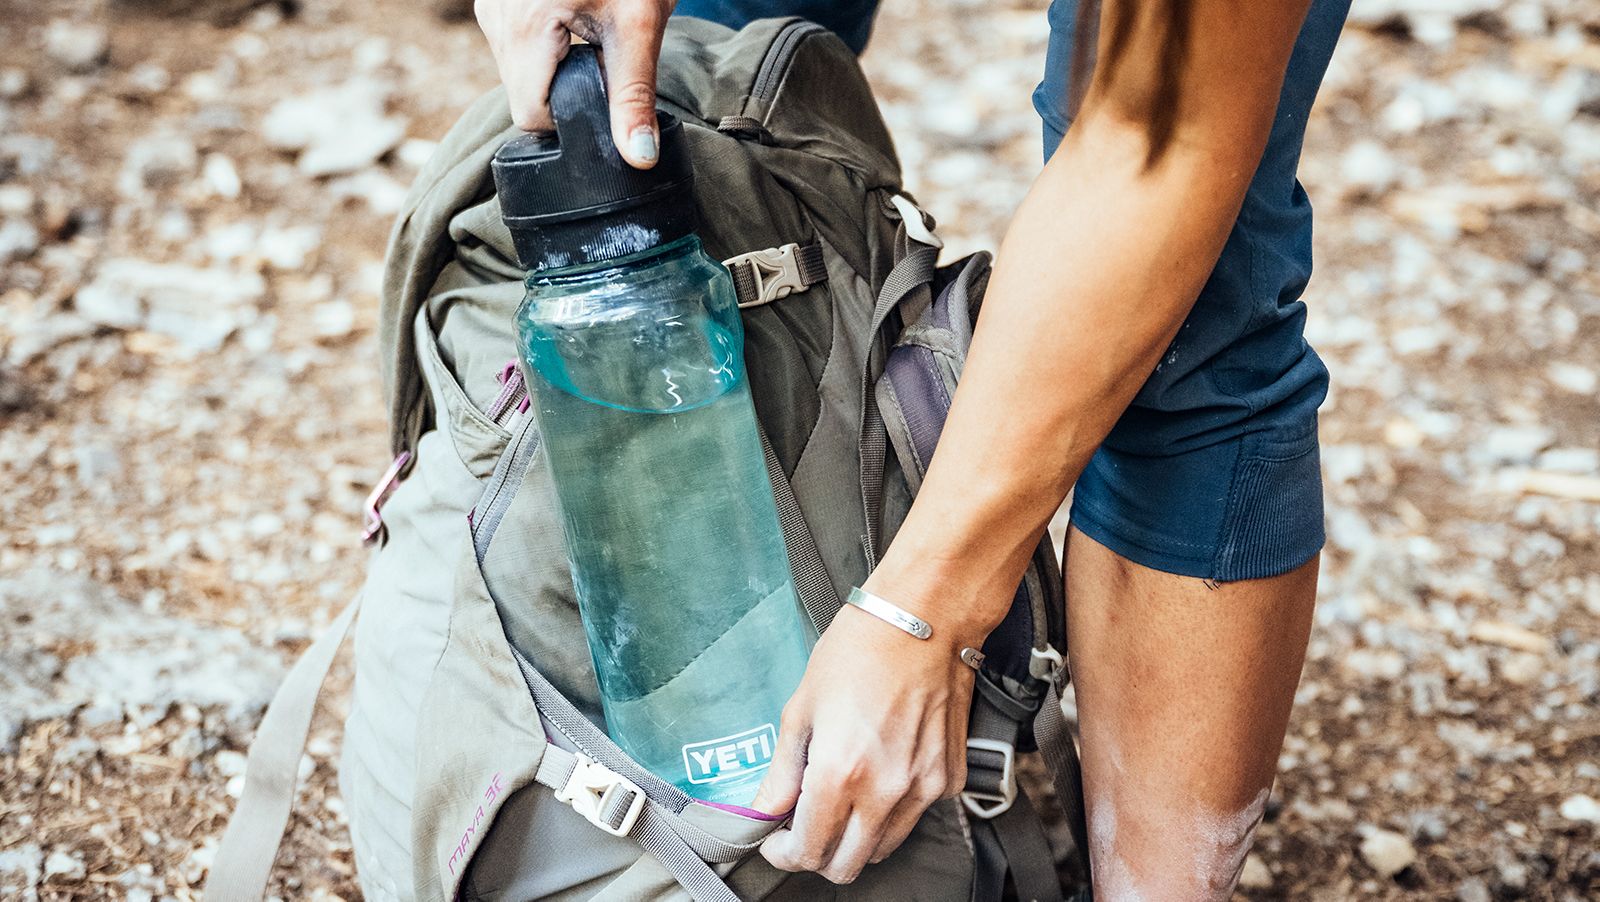 Yeti Yonder Review: The Latest Water Bottle from Yeti